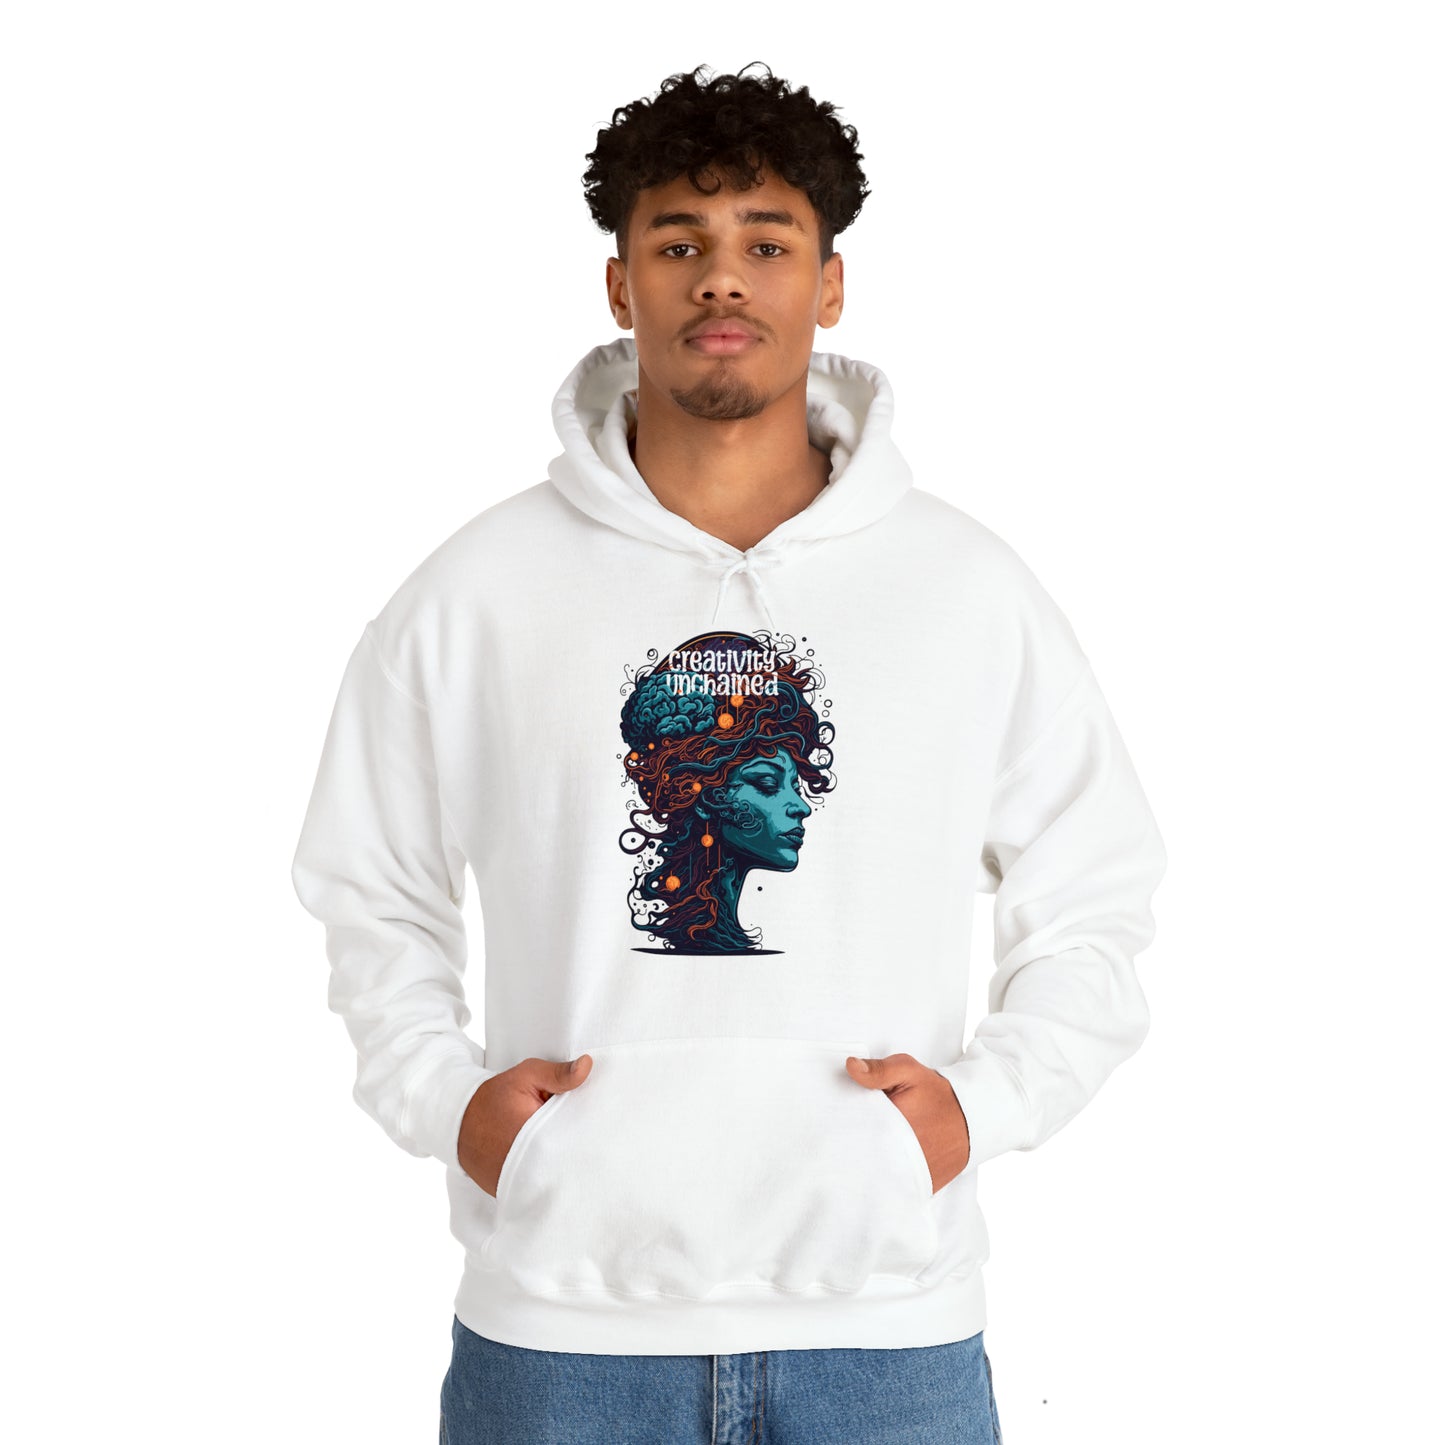 Creativity Unchained Hoodie from Fierce Fusion